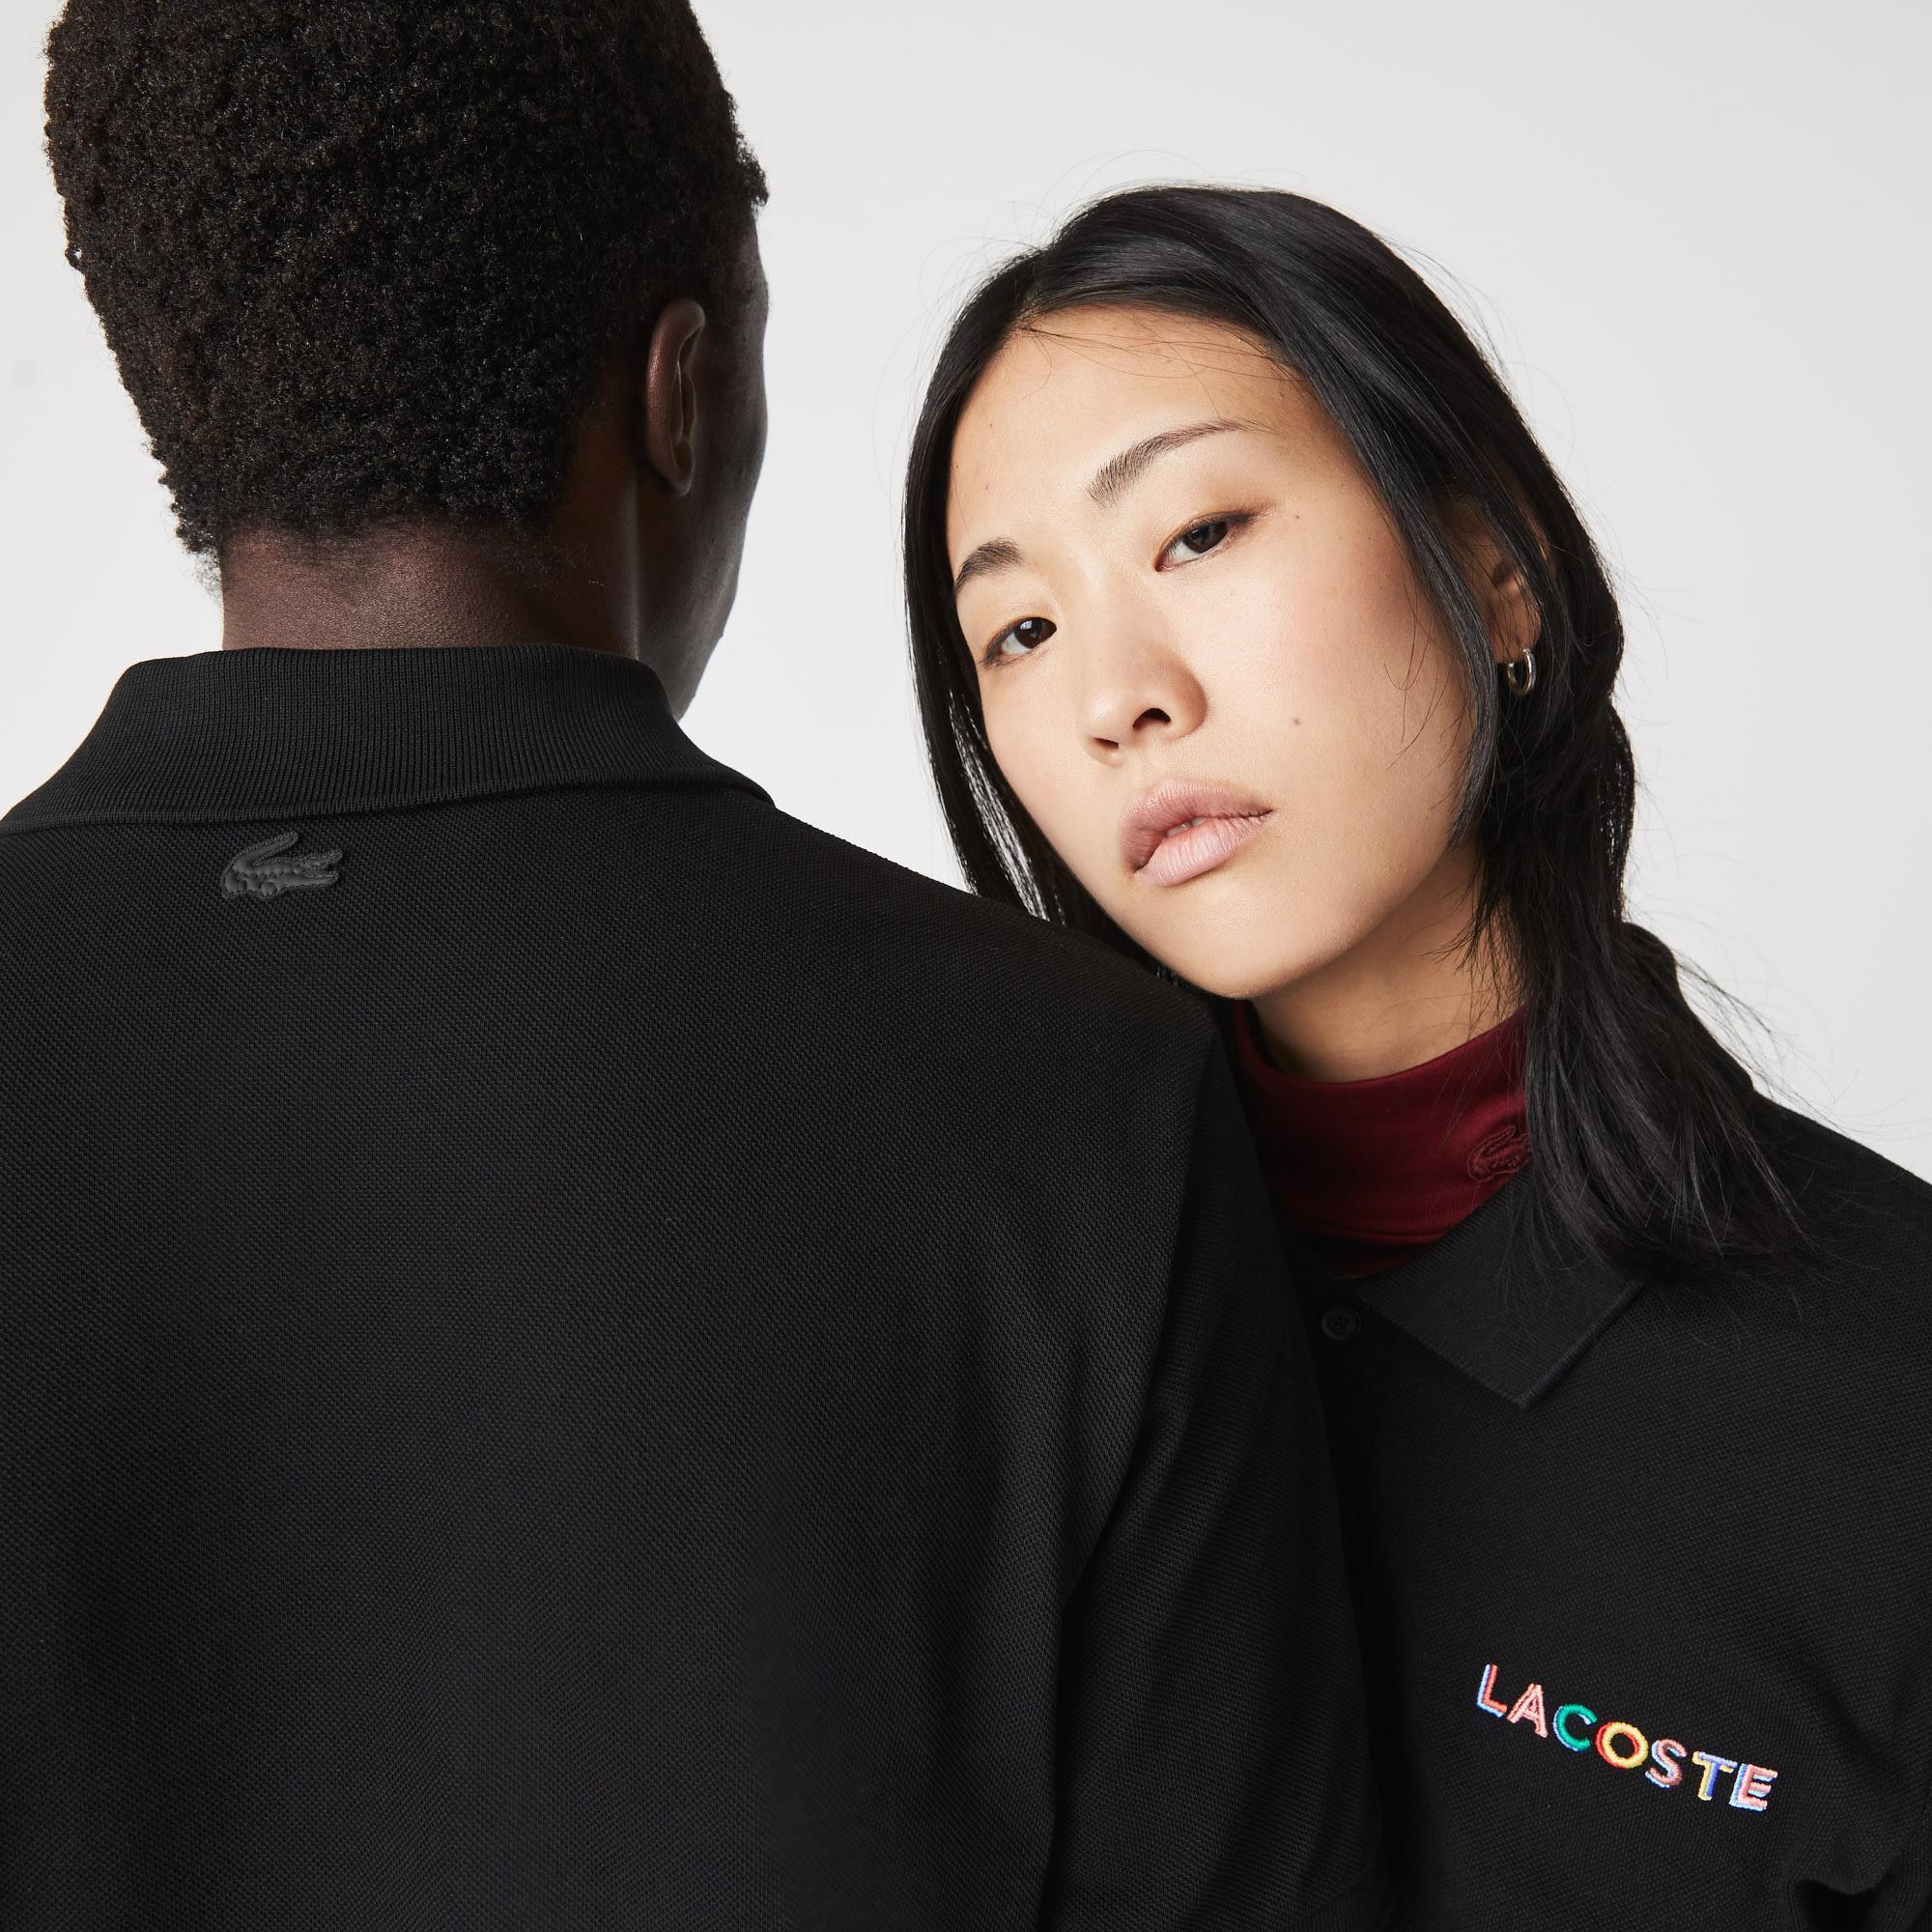 Lacoste L! VE polo shirt with a unisex print in a loose fit